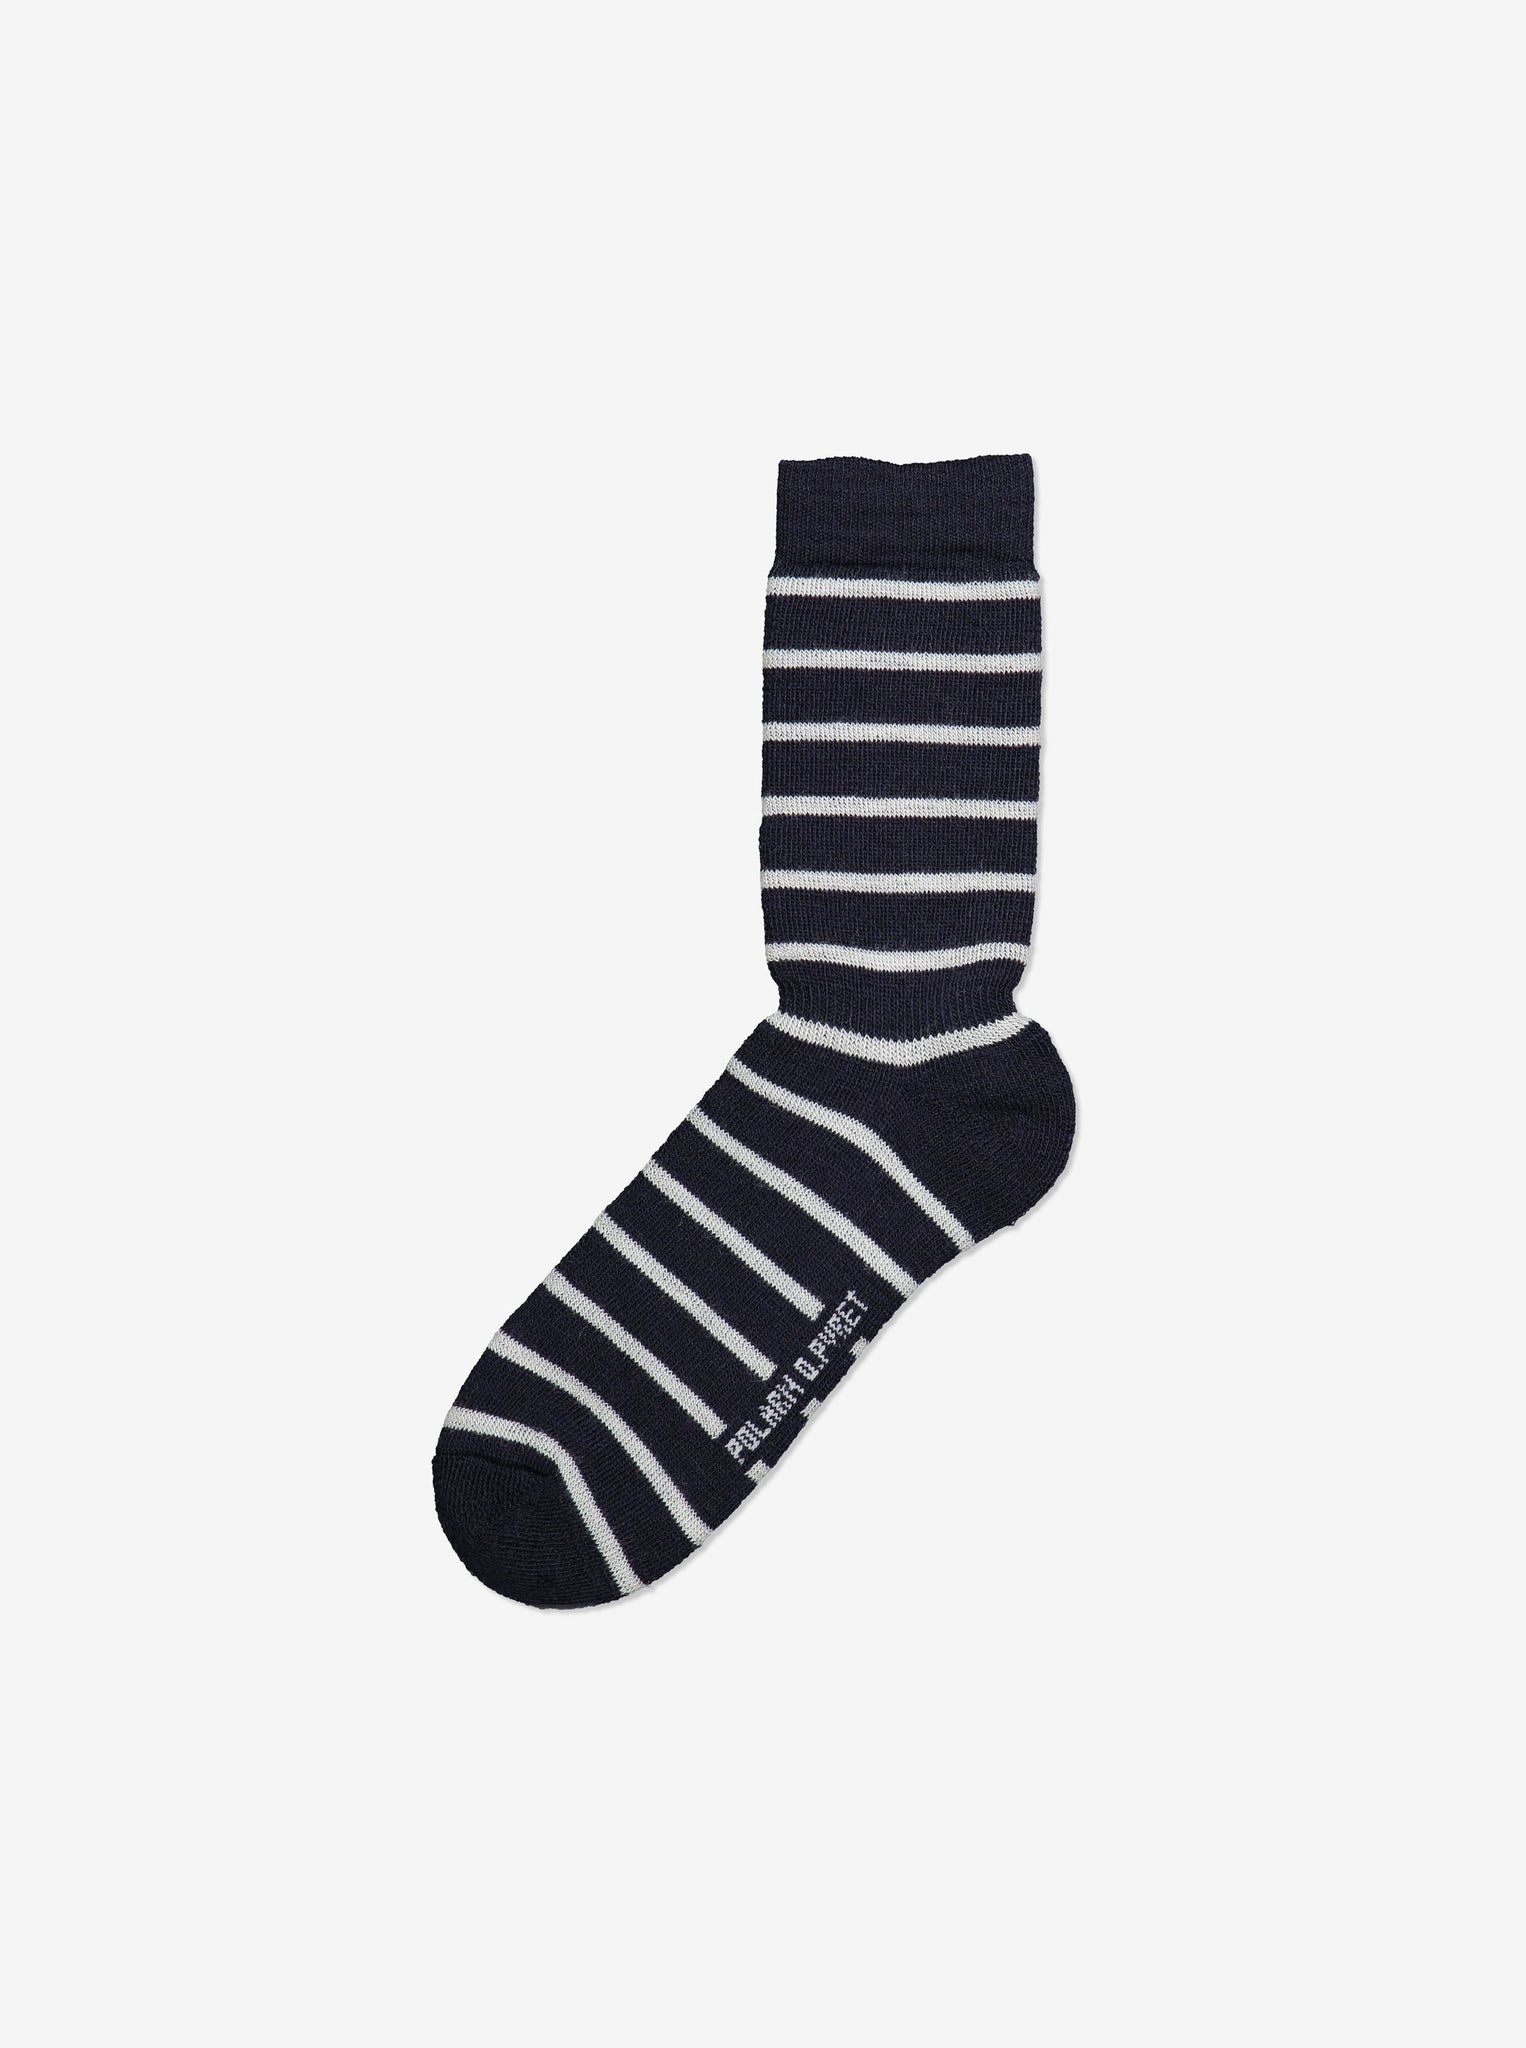 Unisex navy and white striped wool kids socks with terry loop construction and all-around thickness for warmth and comfort,